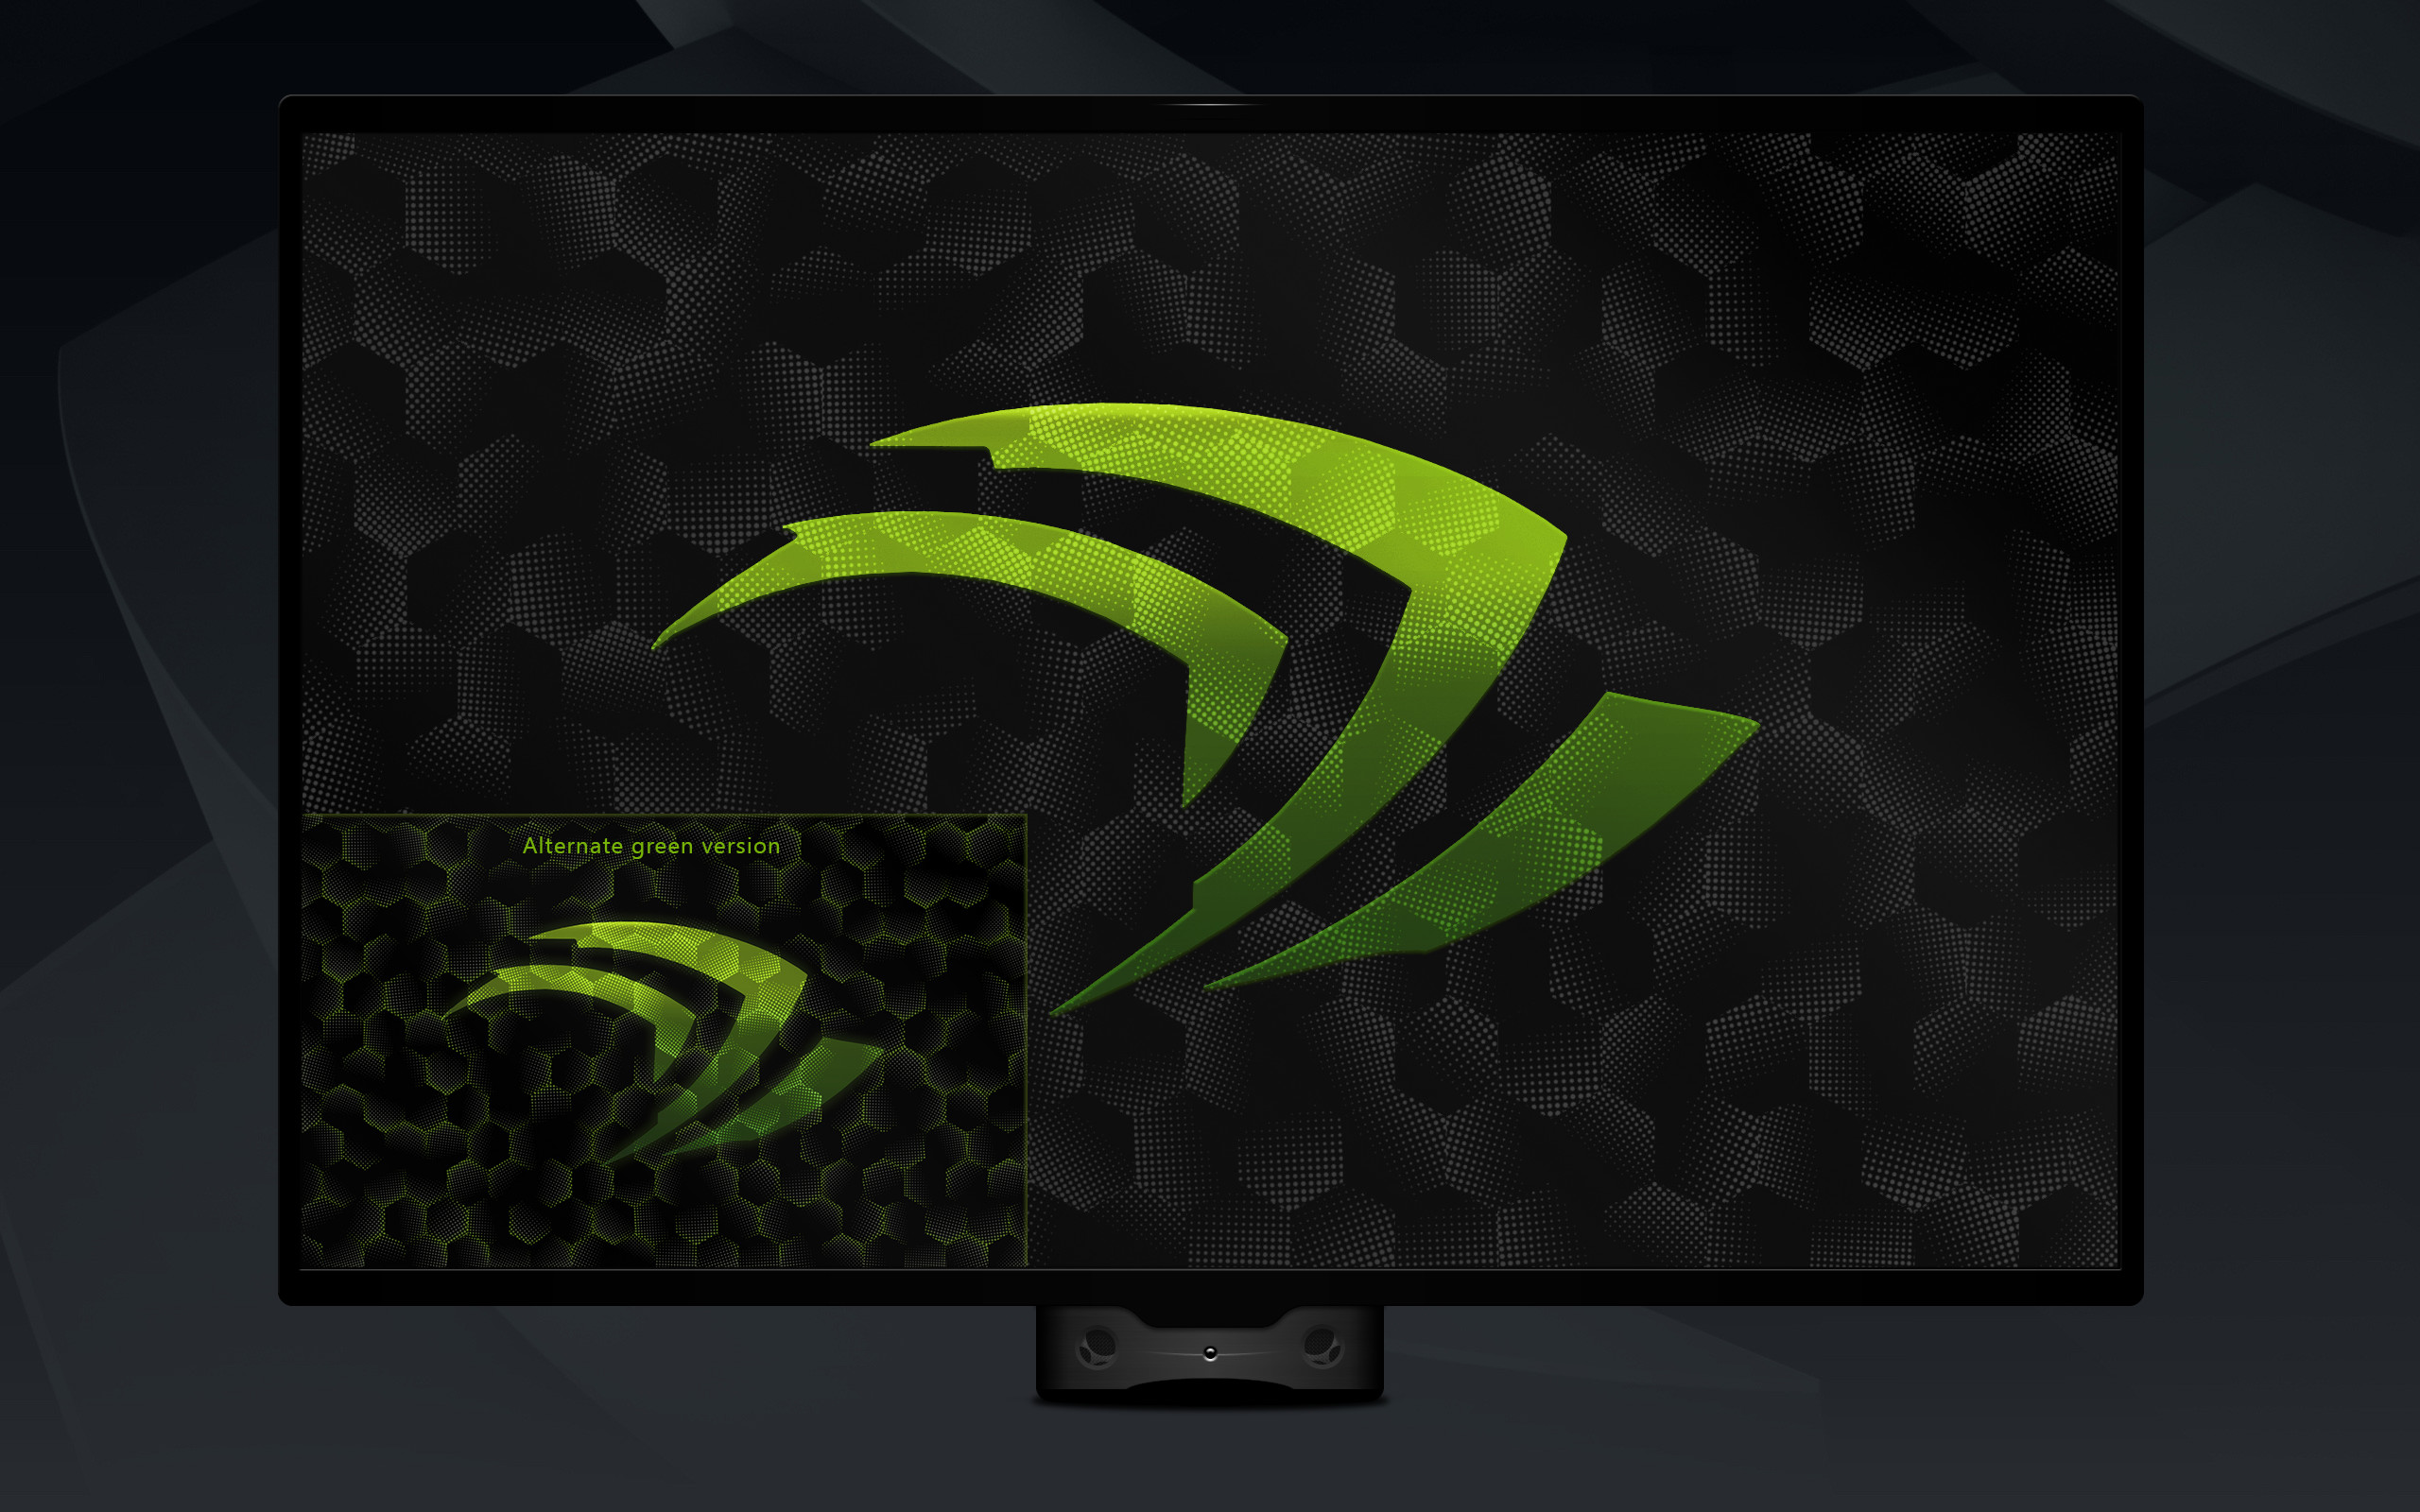 2560x1600 nVIDIA Geforce wallpapers by yorgash nVIDIA Geforce wallpapers by yorgash